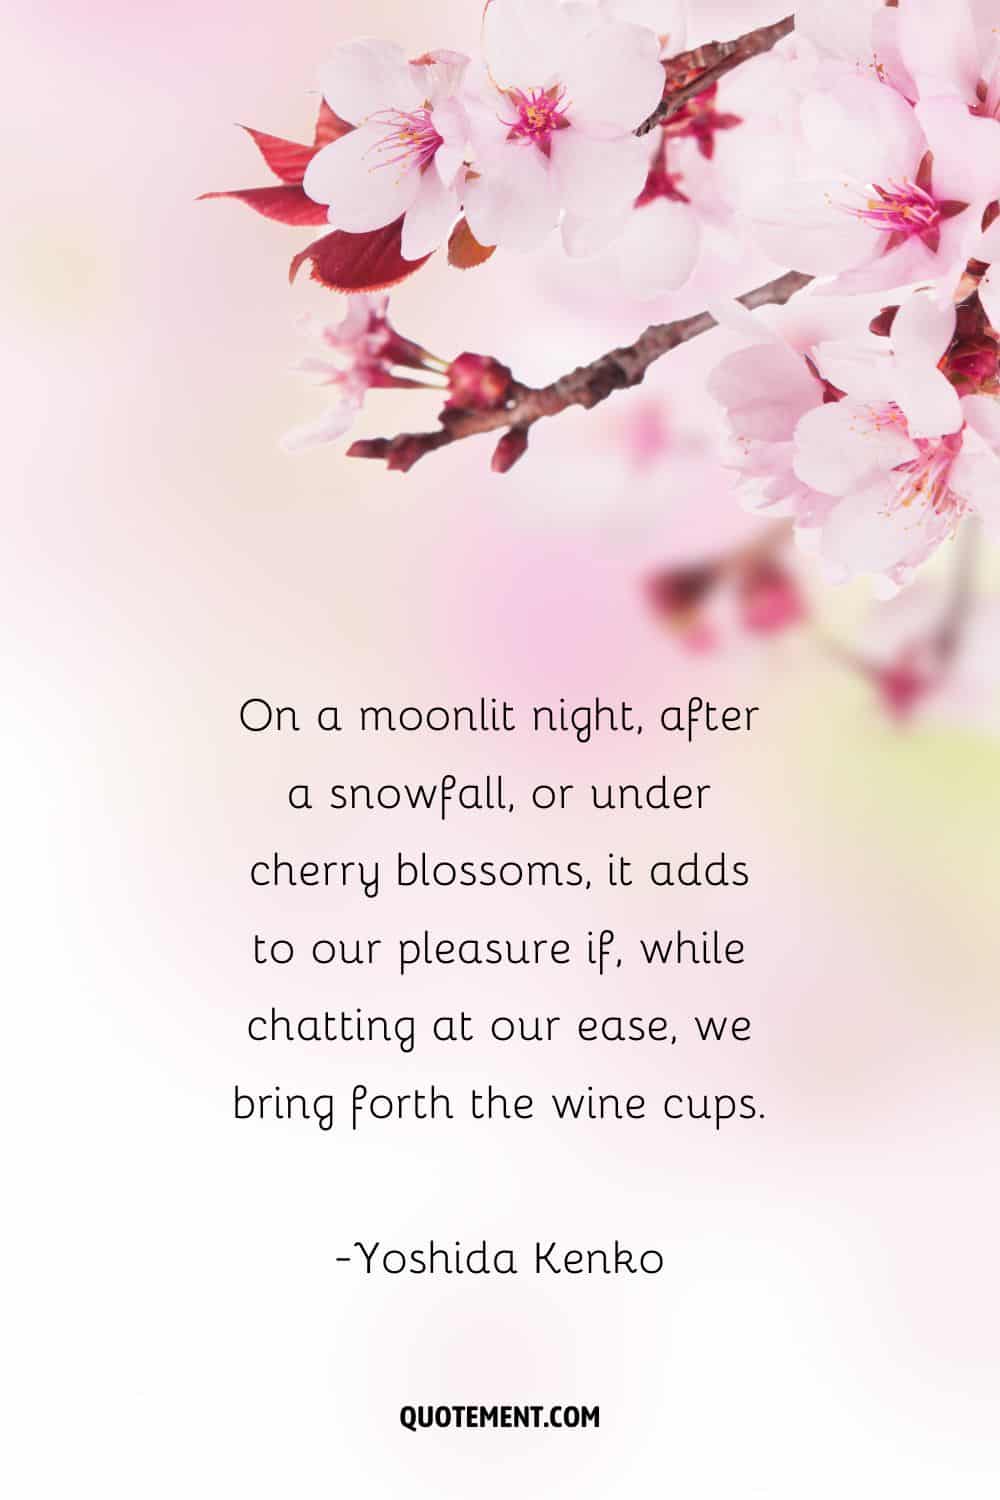 On a moonlit night, after a snowfall, or under cherry blossoms, it adds to our pleasure if, while chatting at our ease, we bring forth the wine cups